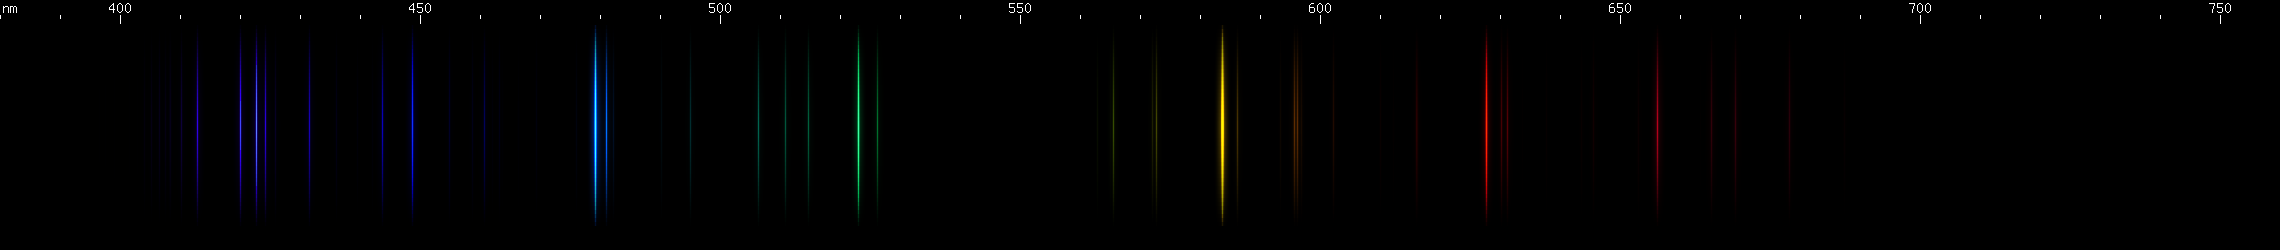 Spectral lines of Gold.